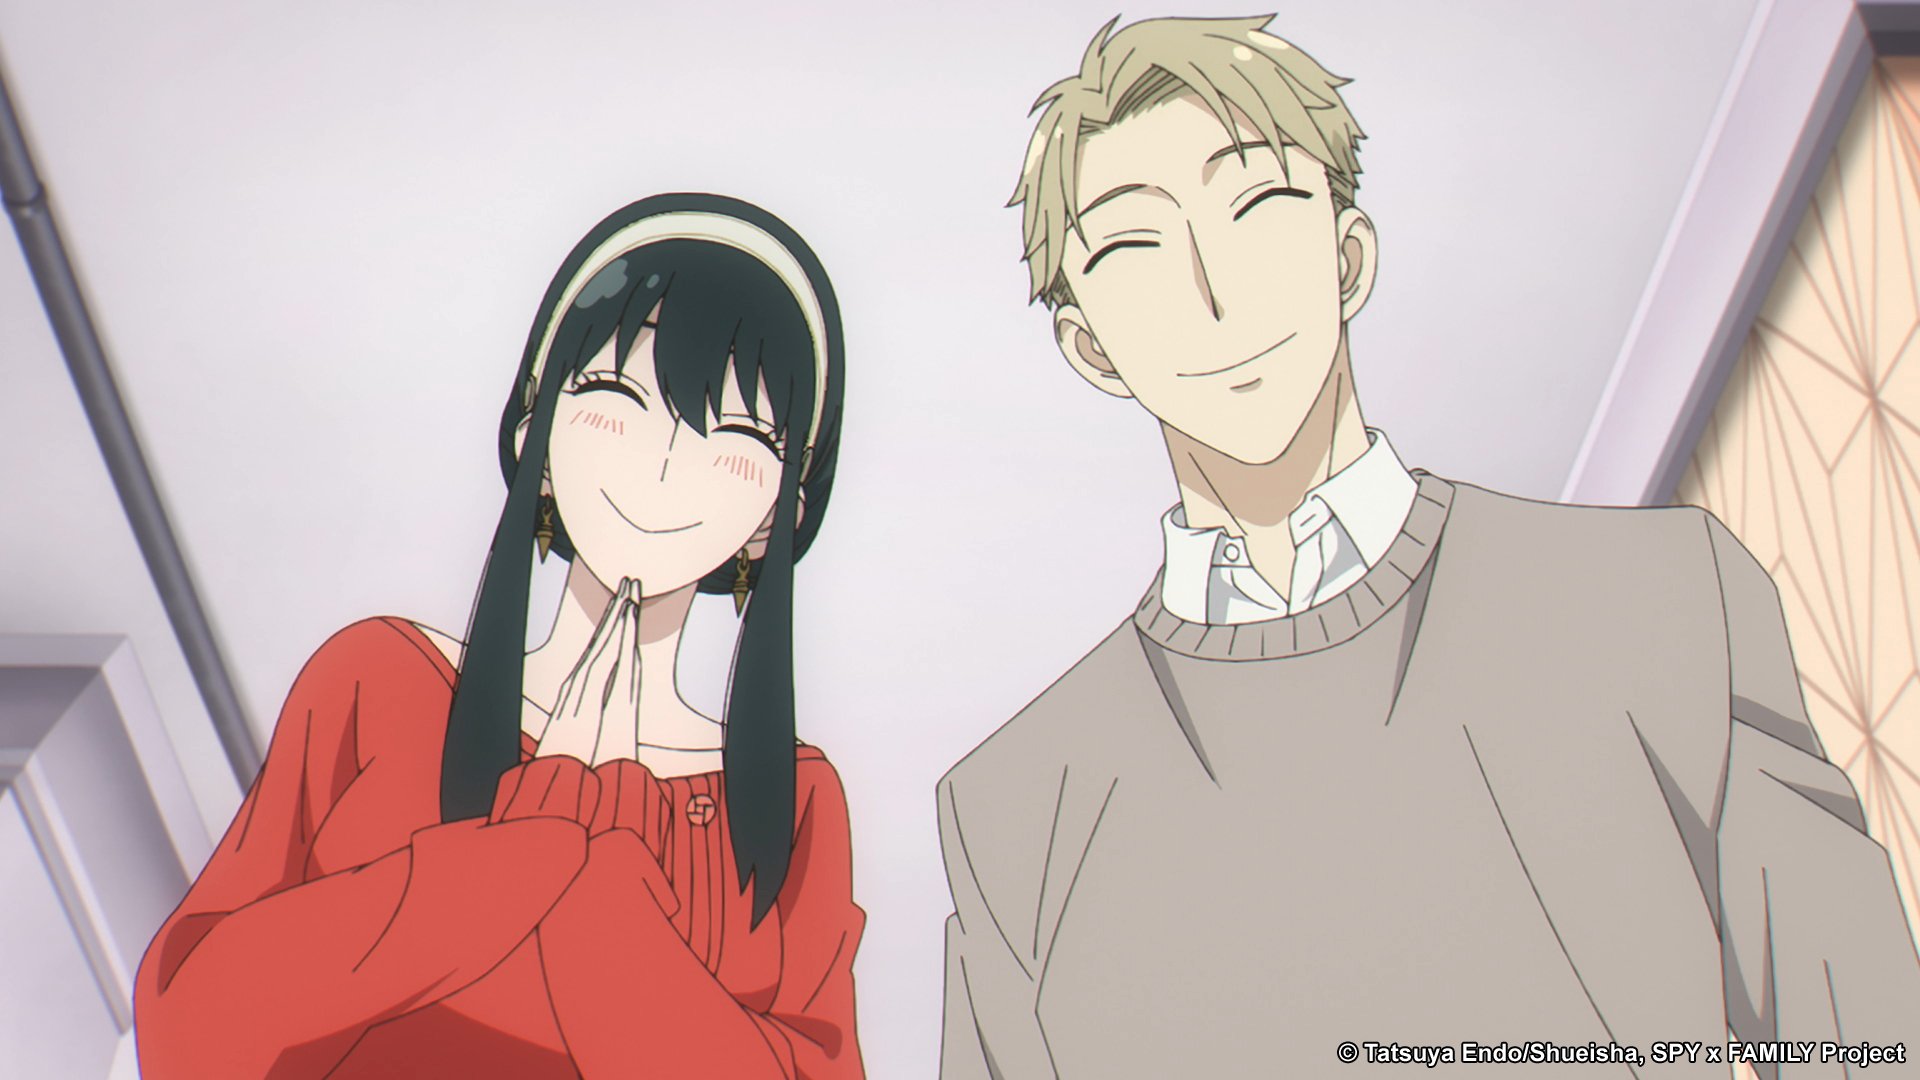 Yor and Loid Forger in 'Spy x Family' for our list of cozy anime to watch during fall 2022. Both are wearing sweaters and smiling at someone.